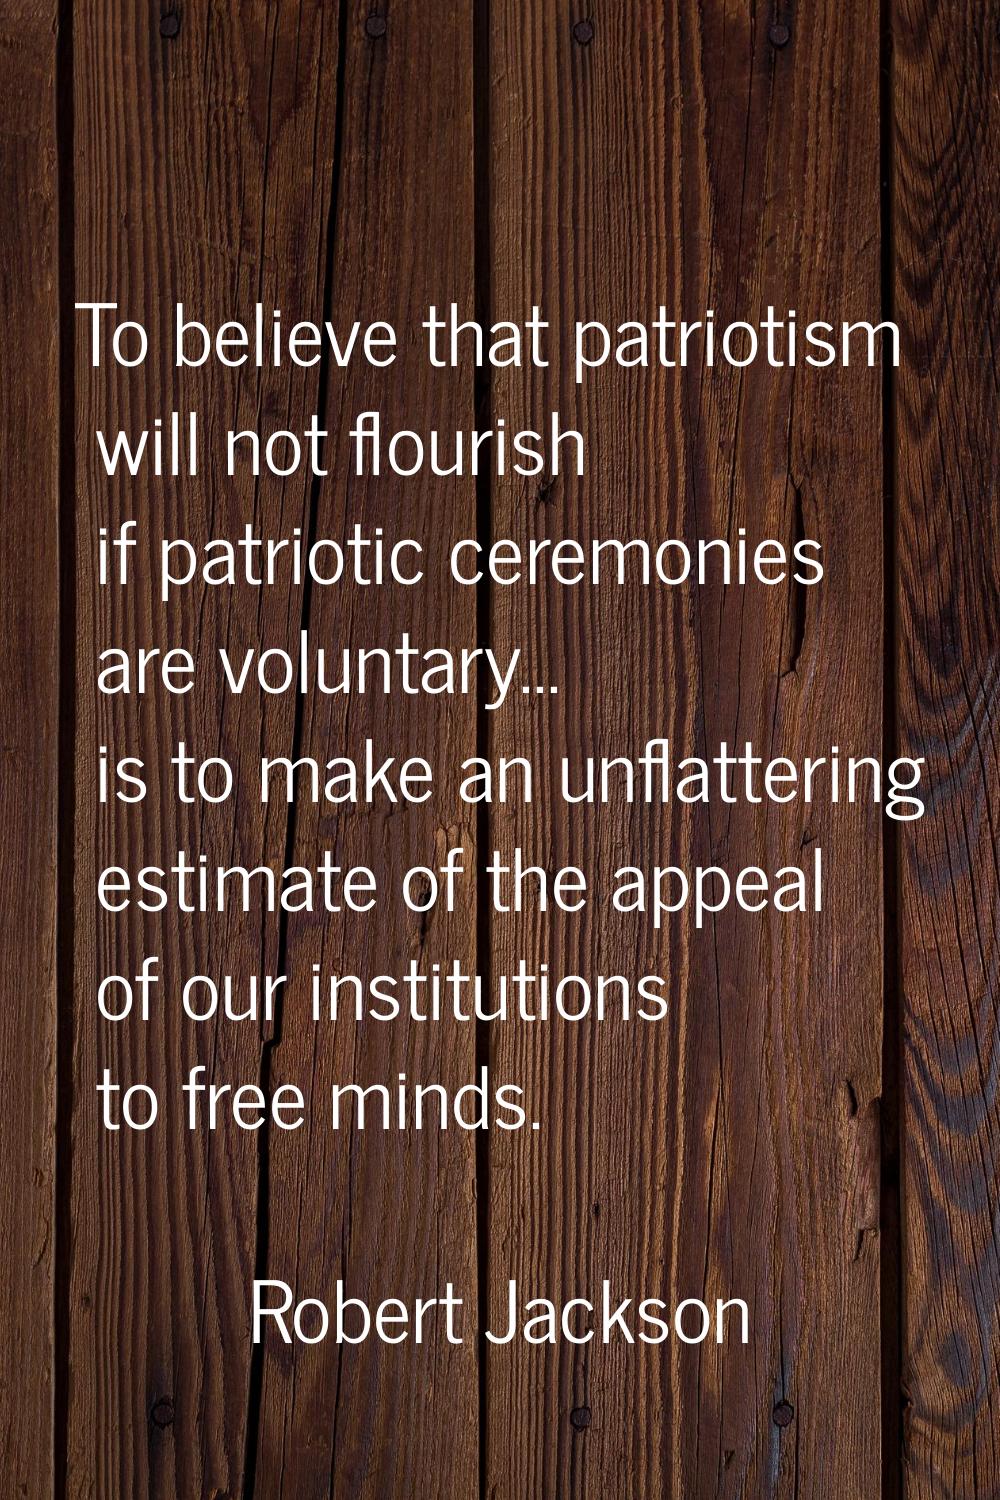 To believe that patriotism will not flourish if patriotic ceremonies are voluntary... is to make an